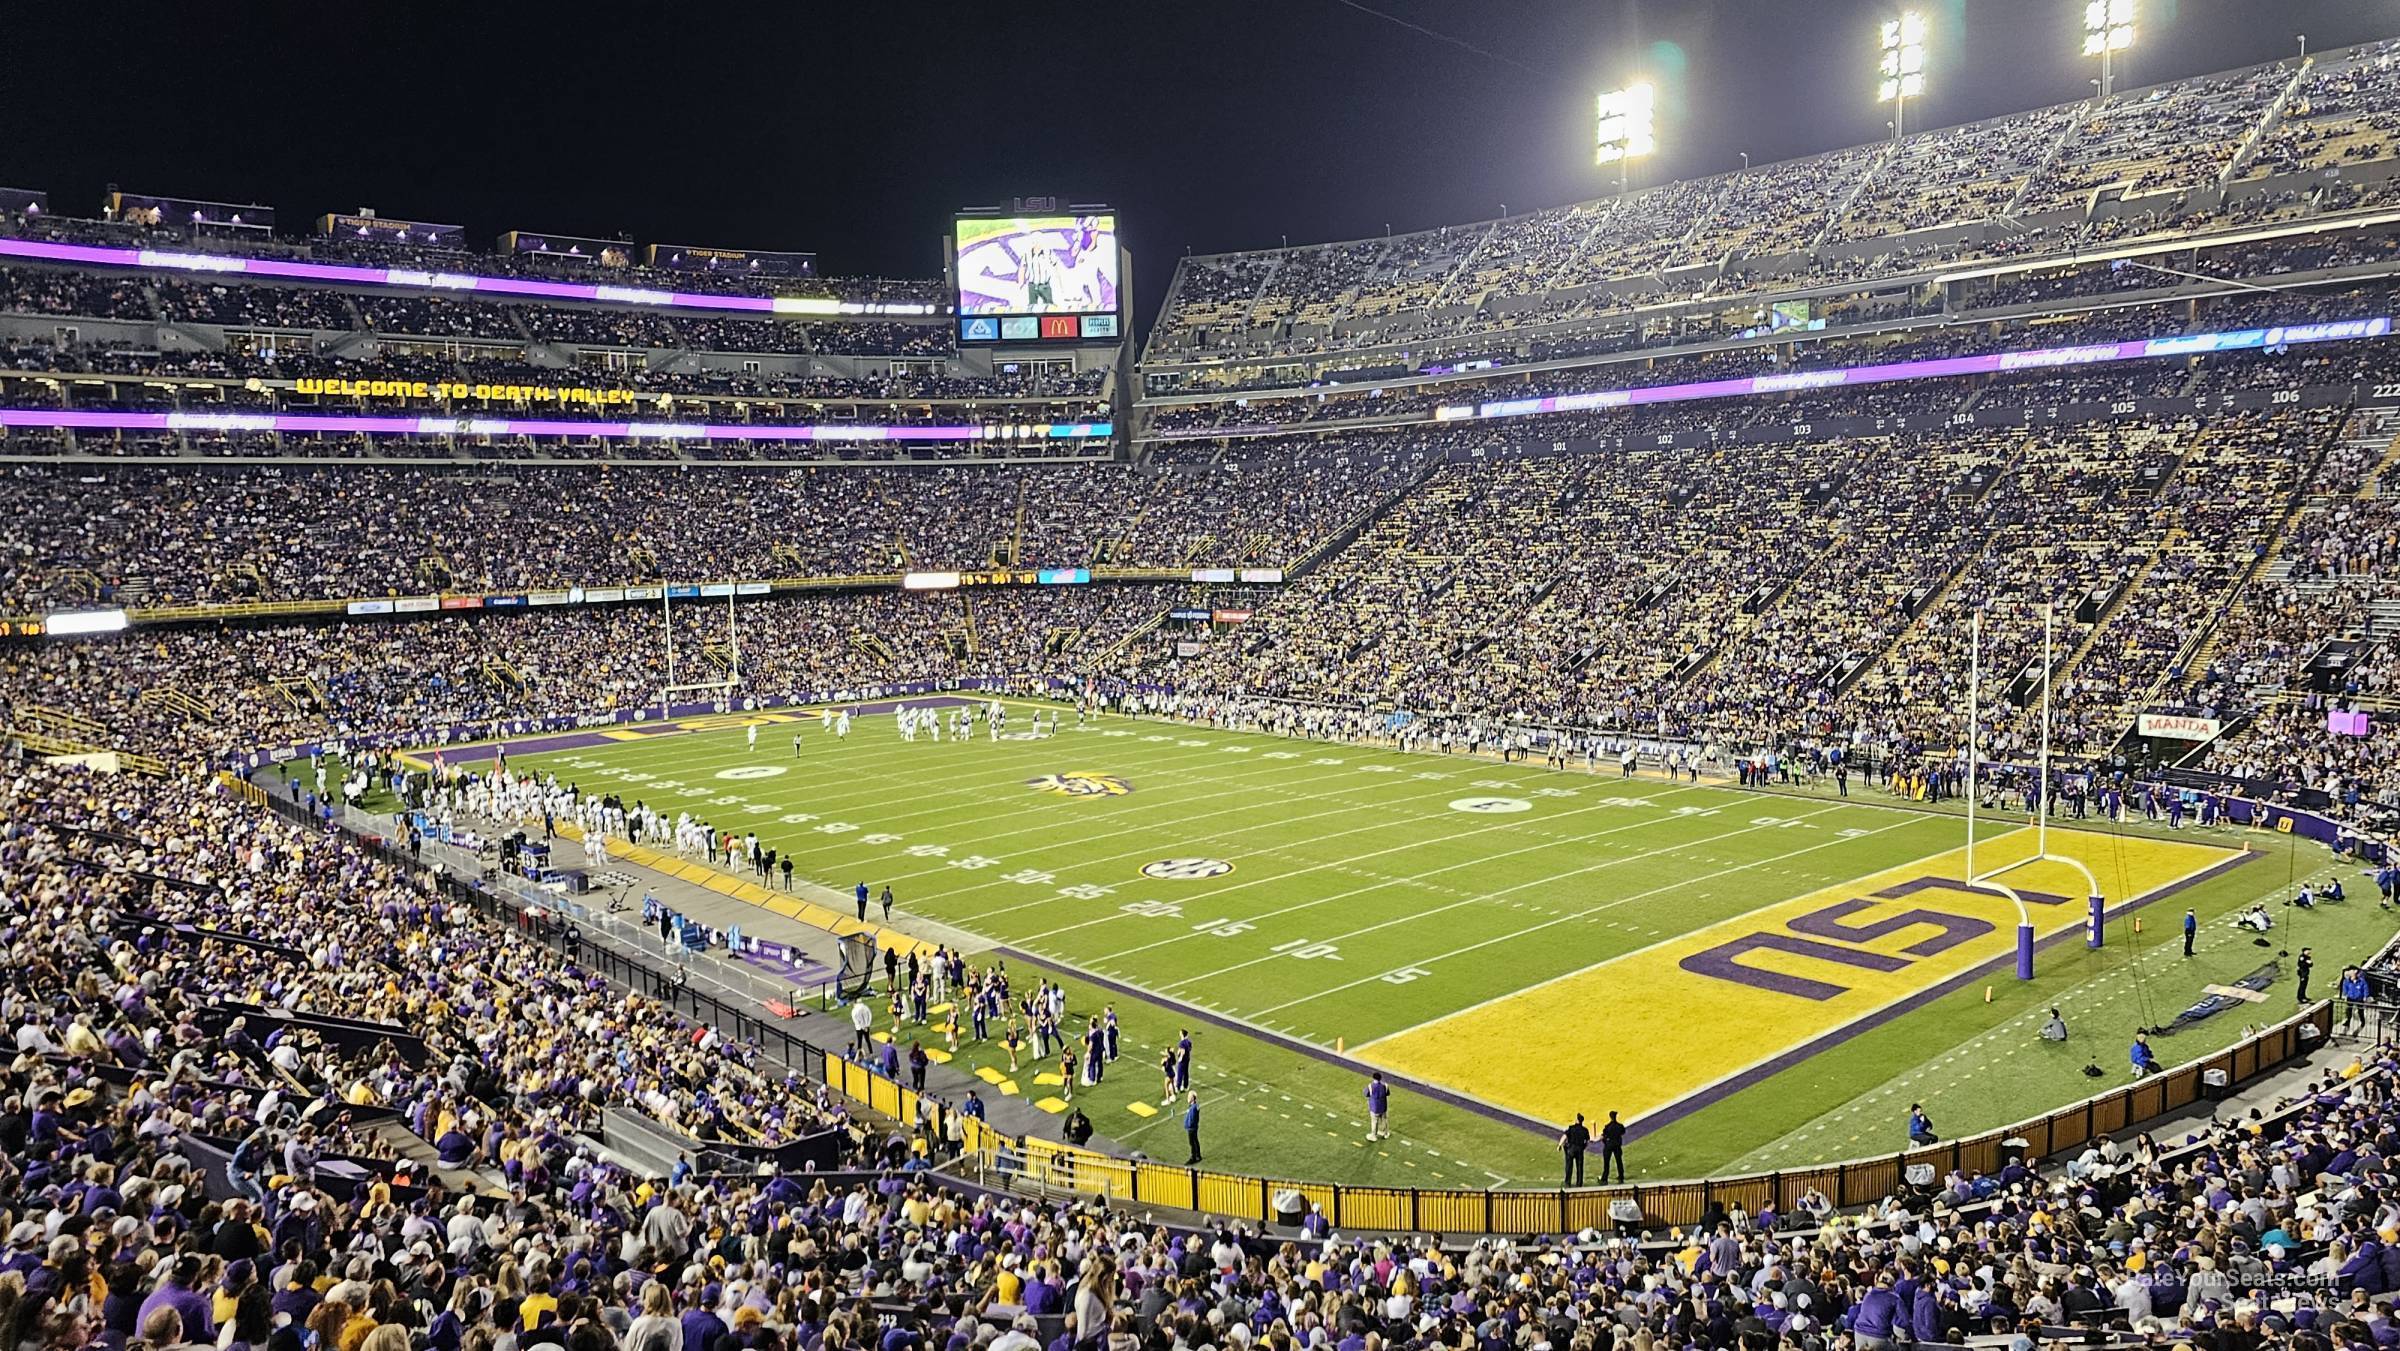 section 240, row 1 seat view  - tiger stadium